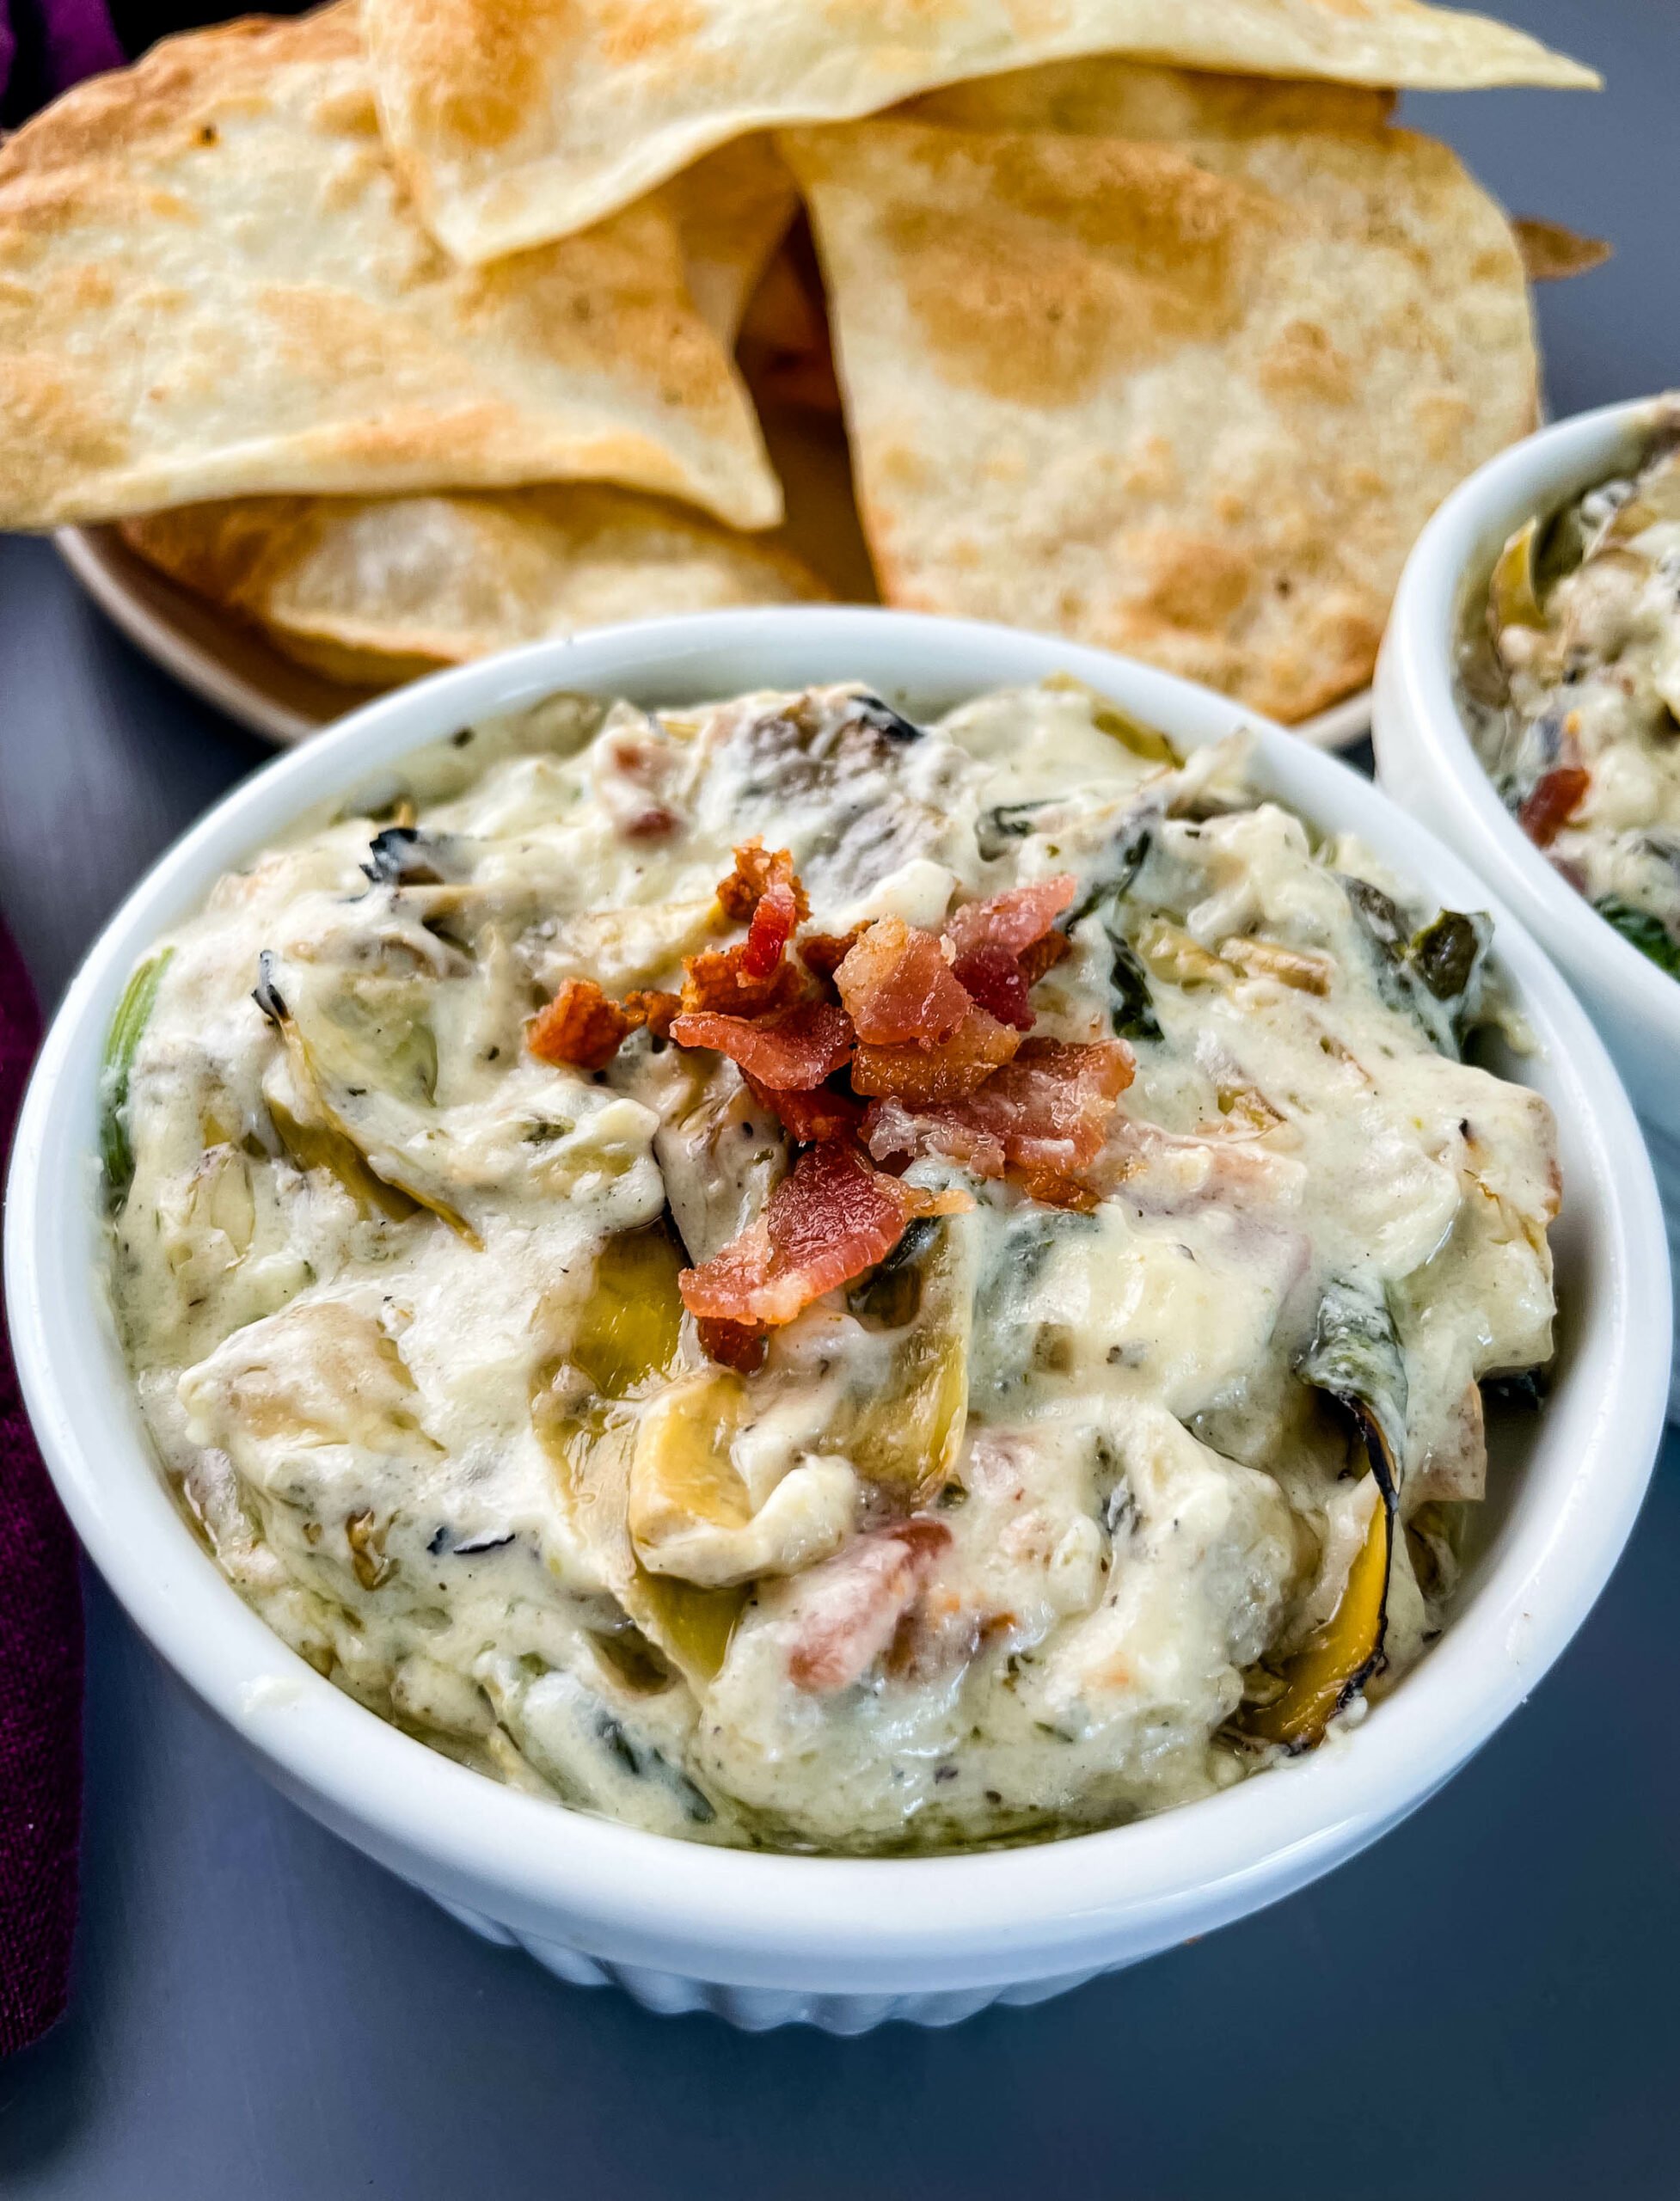 https://www.staysnatched.com/wp-content/uploads/2021/06/bacon-spinach-artichoke-dip-2-1-scaled.jpg